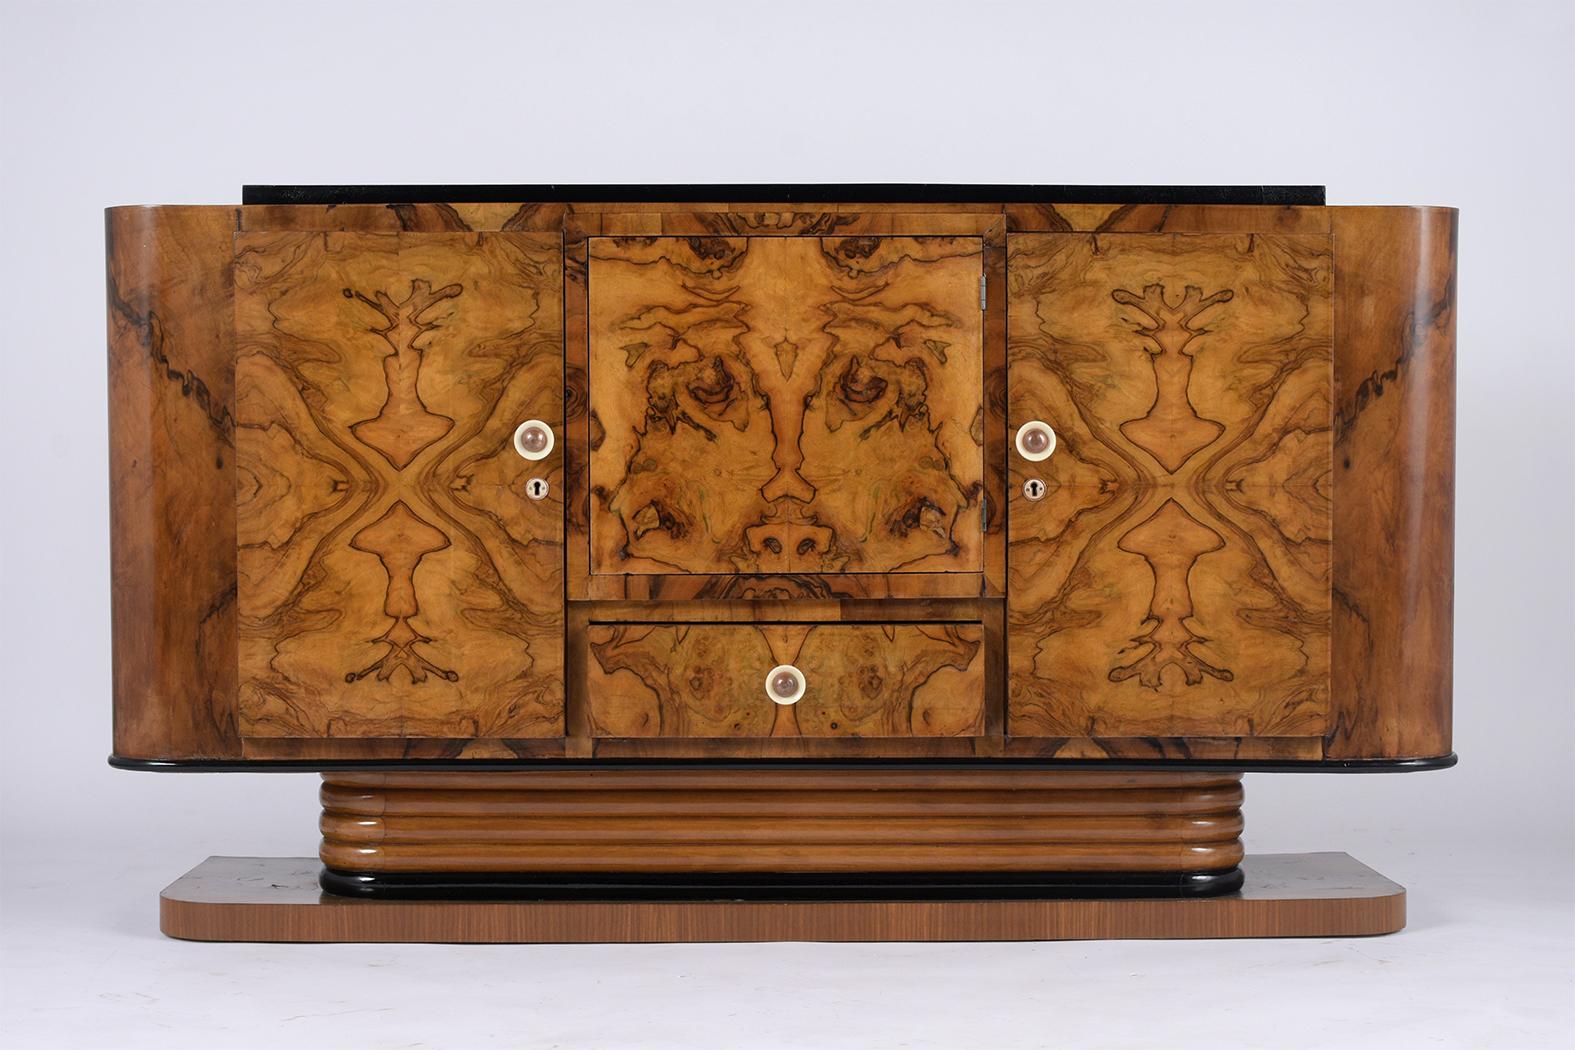 This French Art Deco buffet has been restored and has a walnut and black color combination with a lacquered finish. The buffet features an exotics walnut veneers, flat wooden top, two curved sides, and a center door pushes to open, and single